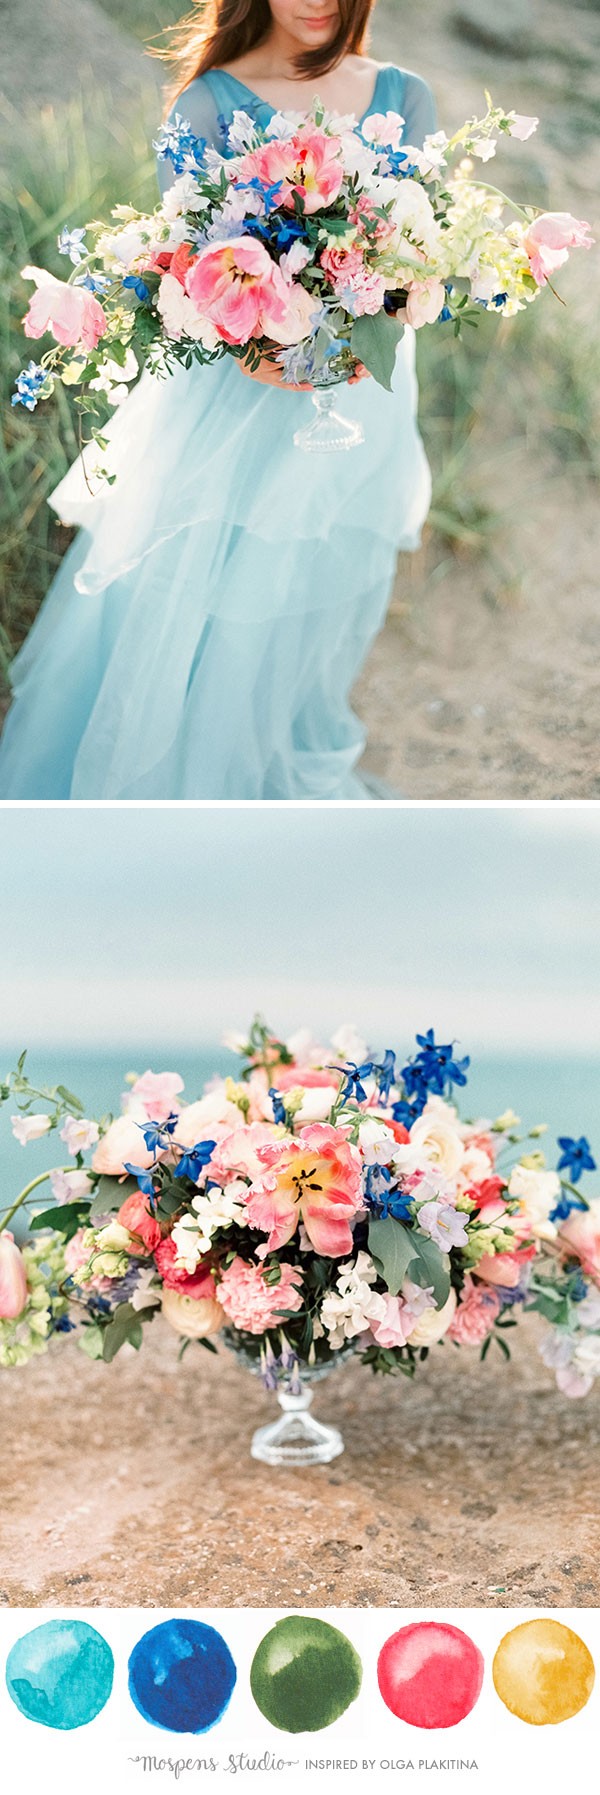 One of THE most beautiful Wedding Color Palettes I have ever seen! - www.mospensstudio.com